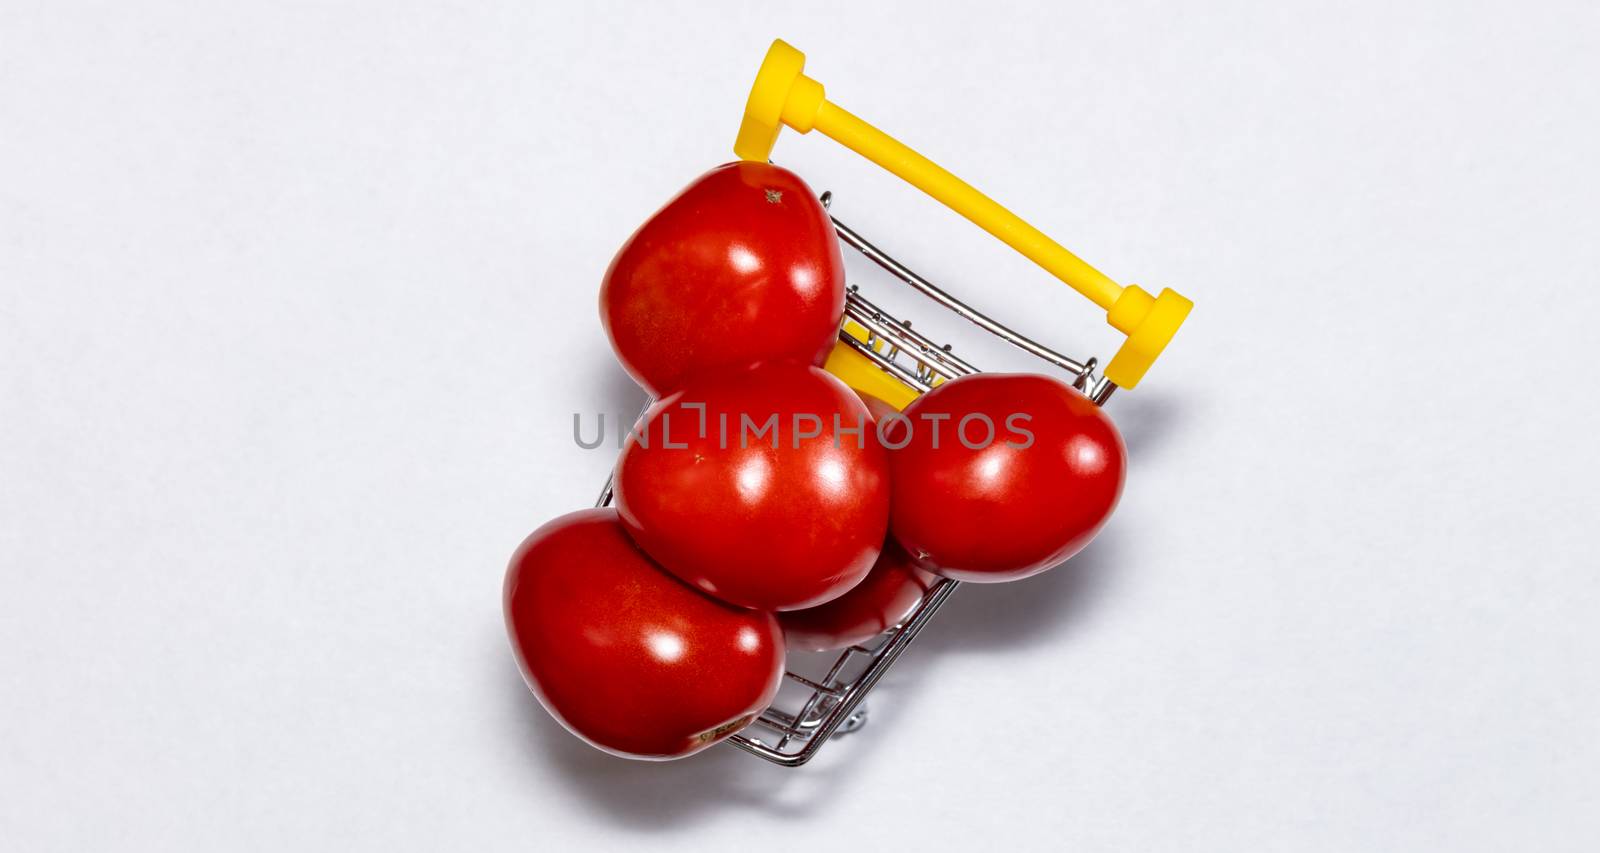 Shot of tomatoes in shopping cart isolated on white background. Top view. Ripe tasty red tomatos in shopping cart. Tomato trading concept. Online shopping concept. Copy space.